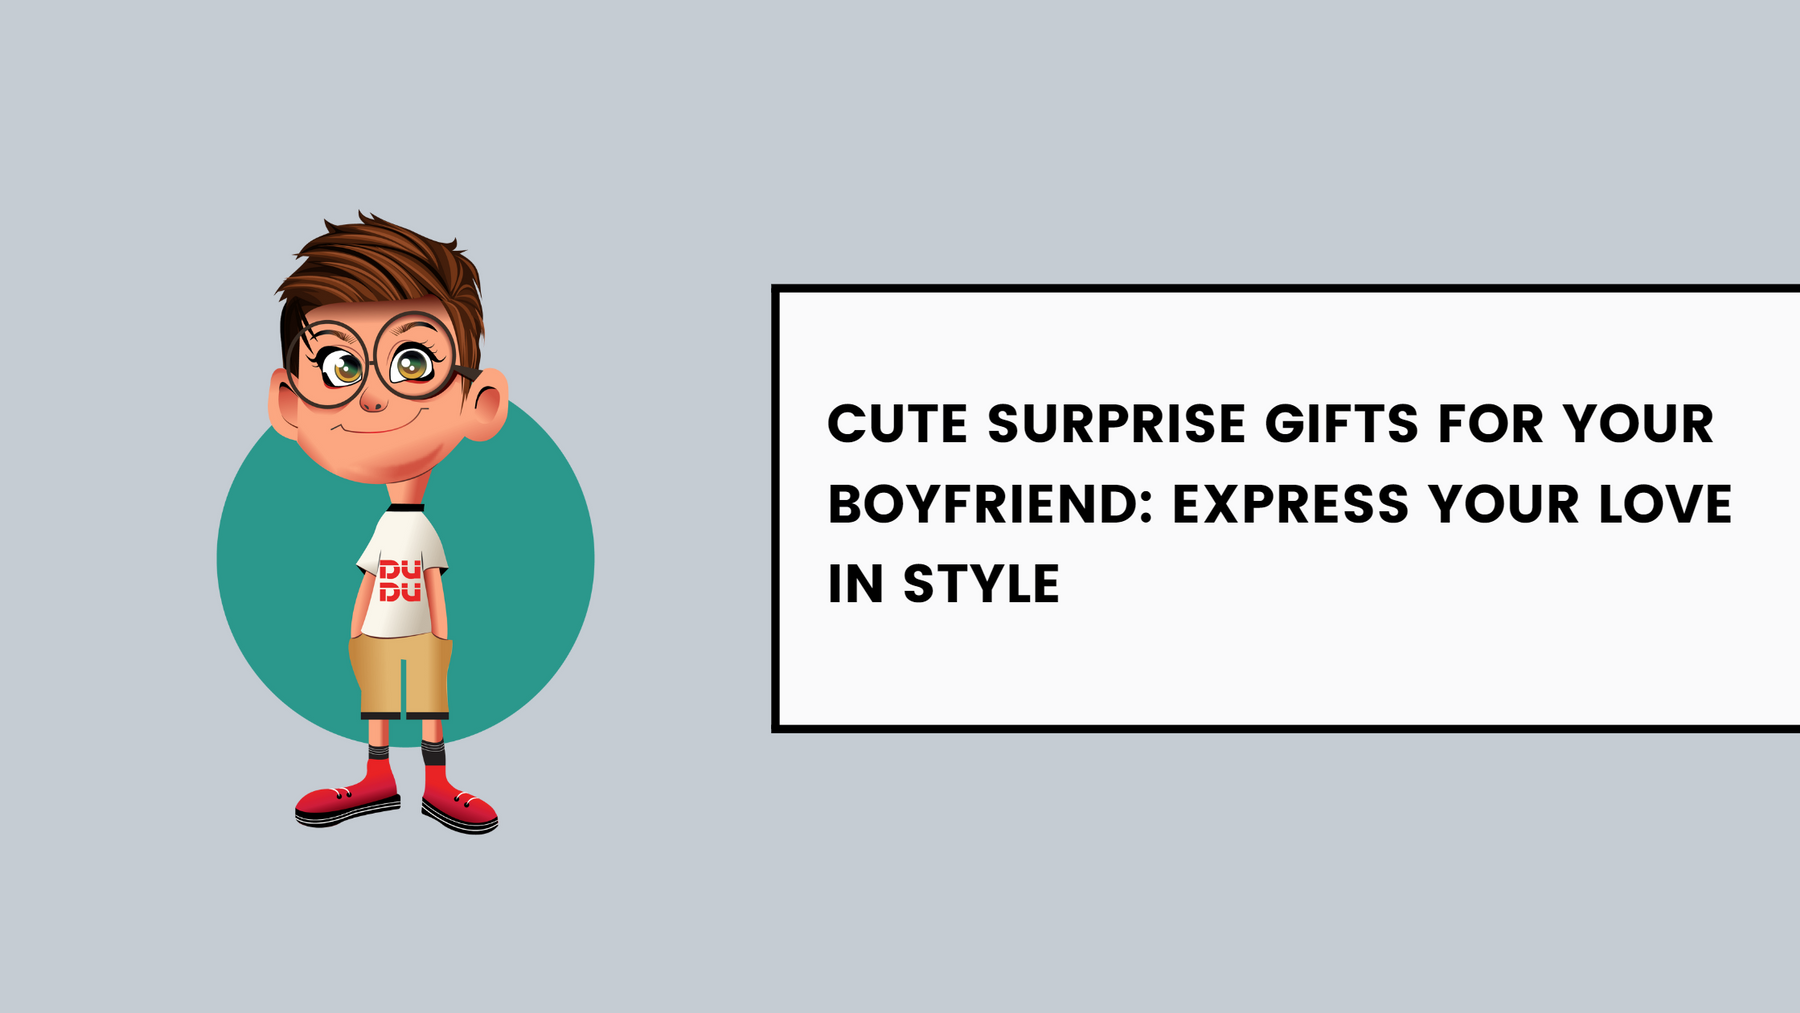 Cute Surprise Gifts For Your Boyfriend: Express Your Love In Style